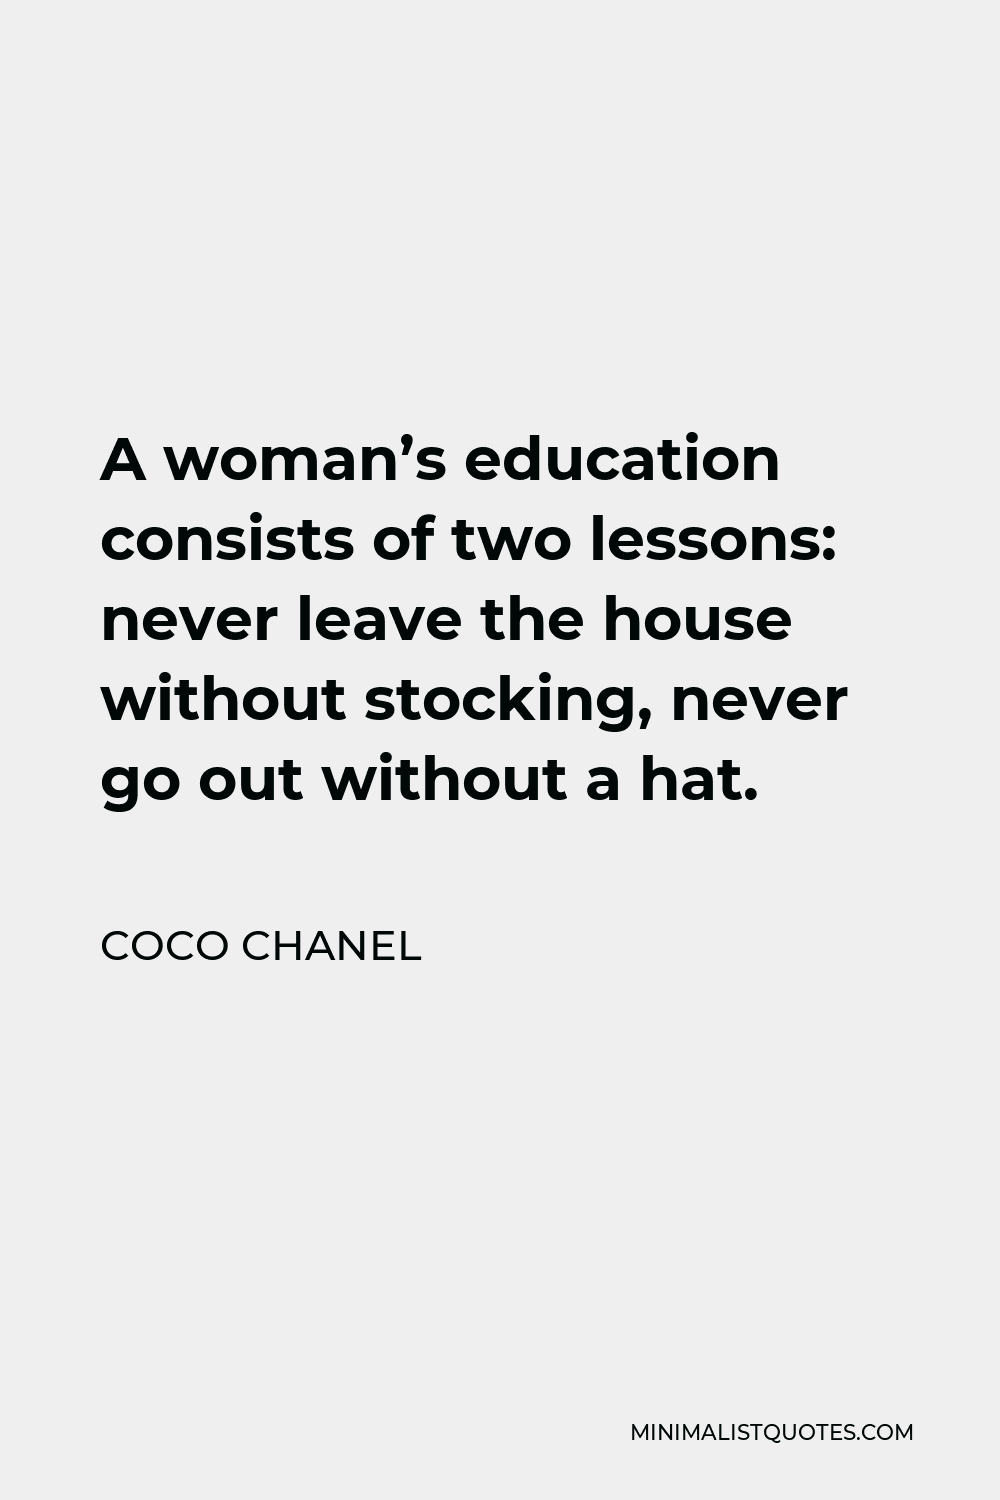 Coco Chanel Quote - A woman’s education consists of two lessons: never leave the house without stocking, never go out without a hat.